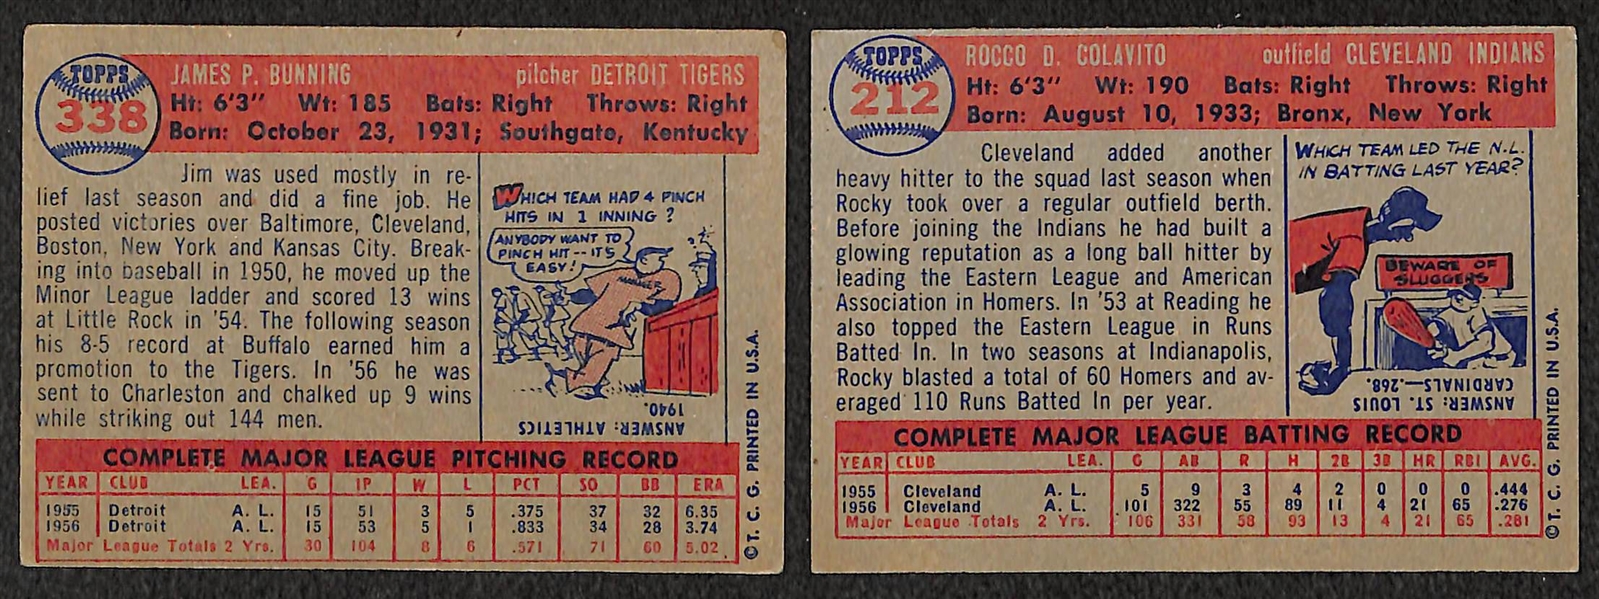 Lot of 2 - 1957 Topps Jim Bunning RC & Rocky Colavito RC